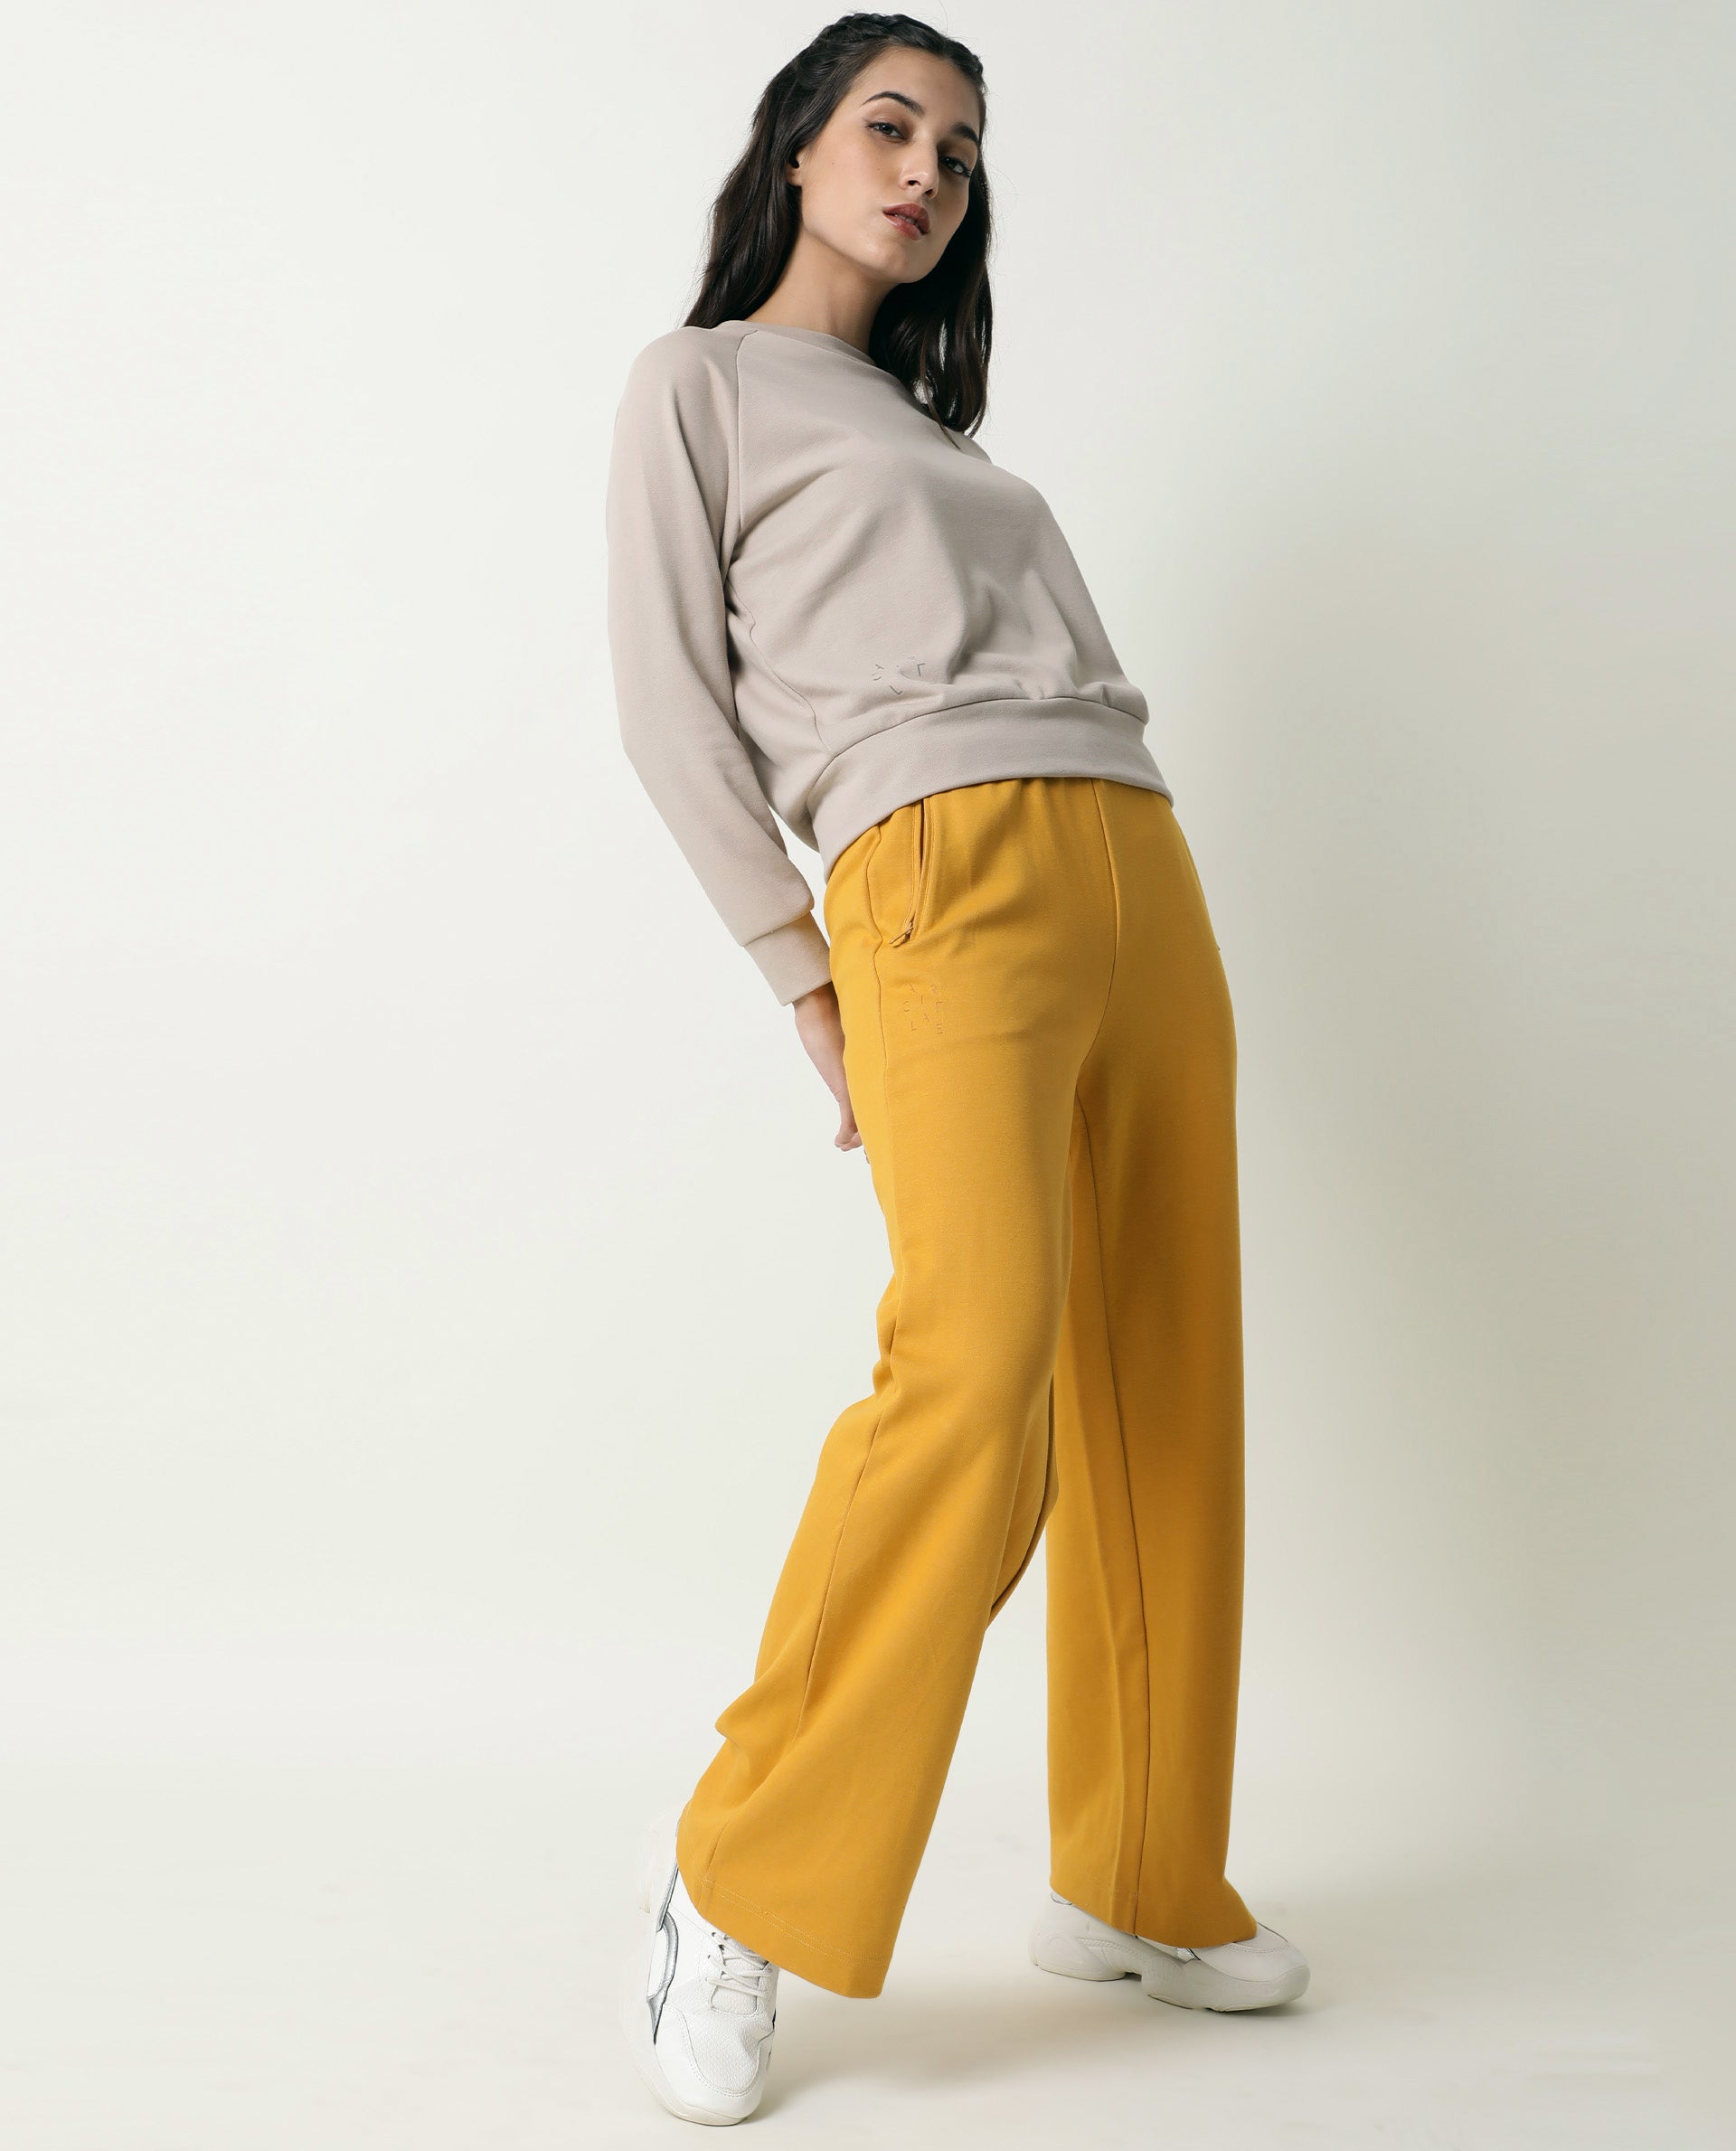 Women's Pants  Cargo, Wide Leg, Drop Crotch and Track